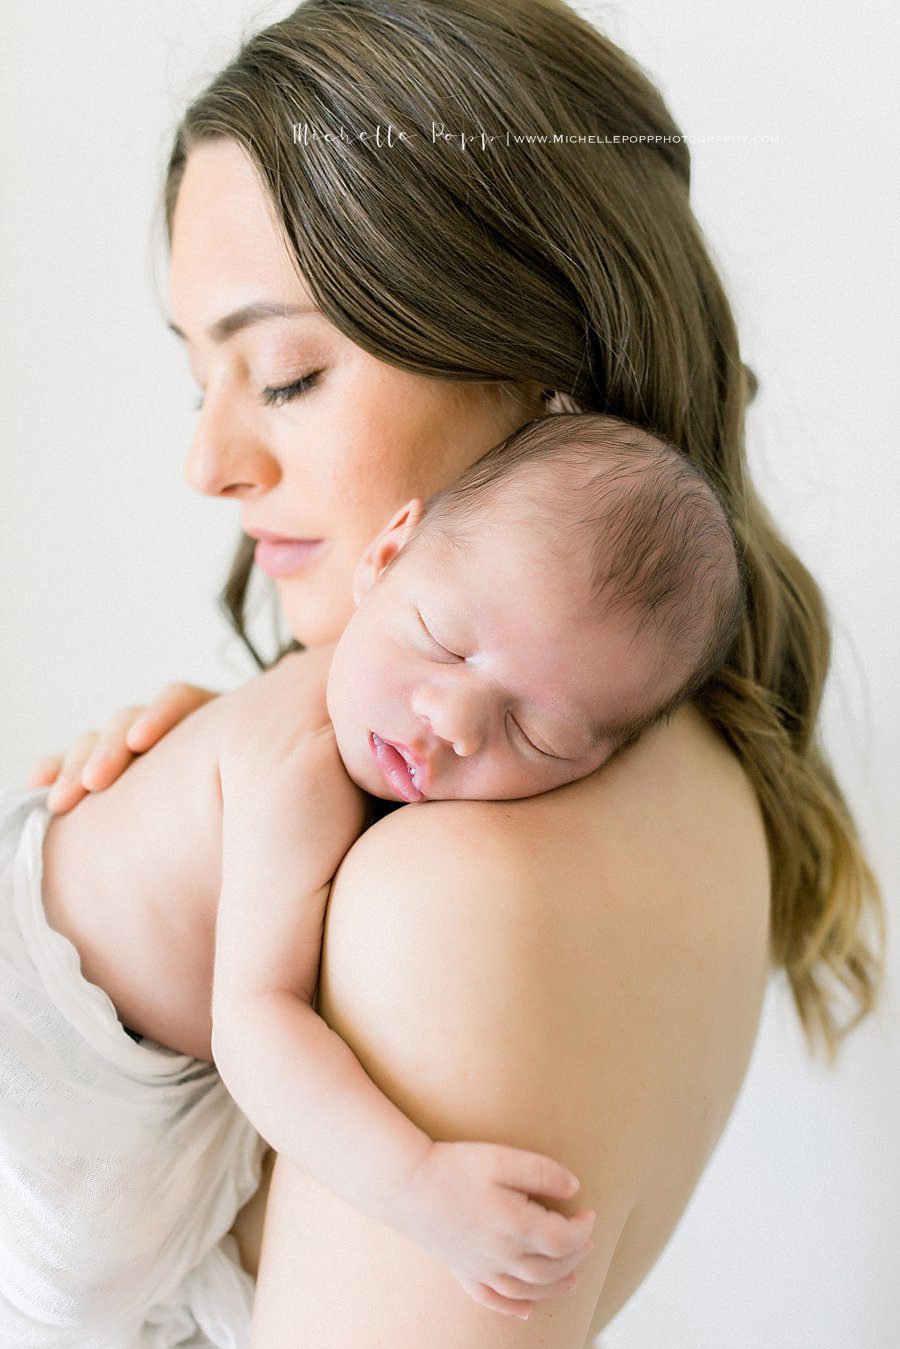 mother gently holds her newborn baby during the newborn photography shoot